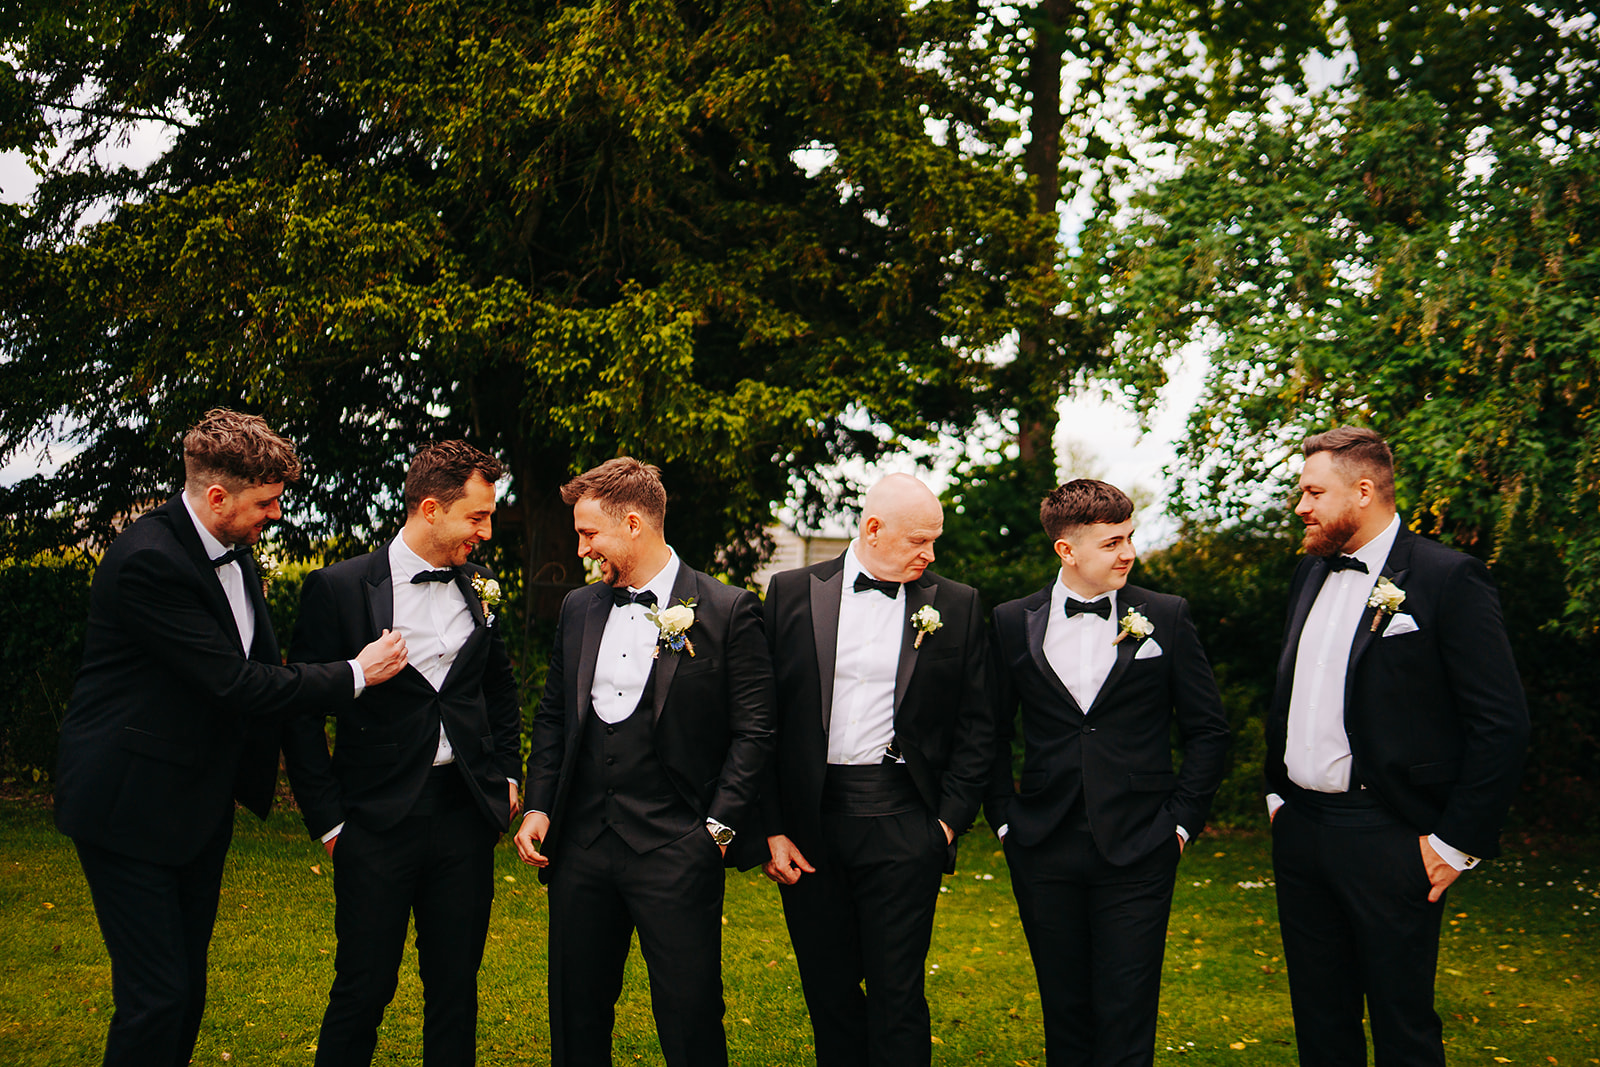 Groom and groomsmen on the lawn at hornington manor